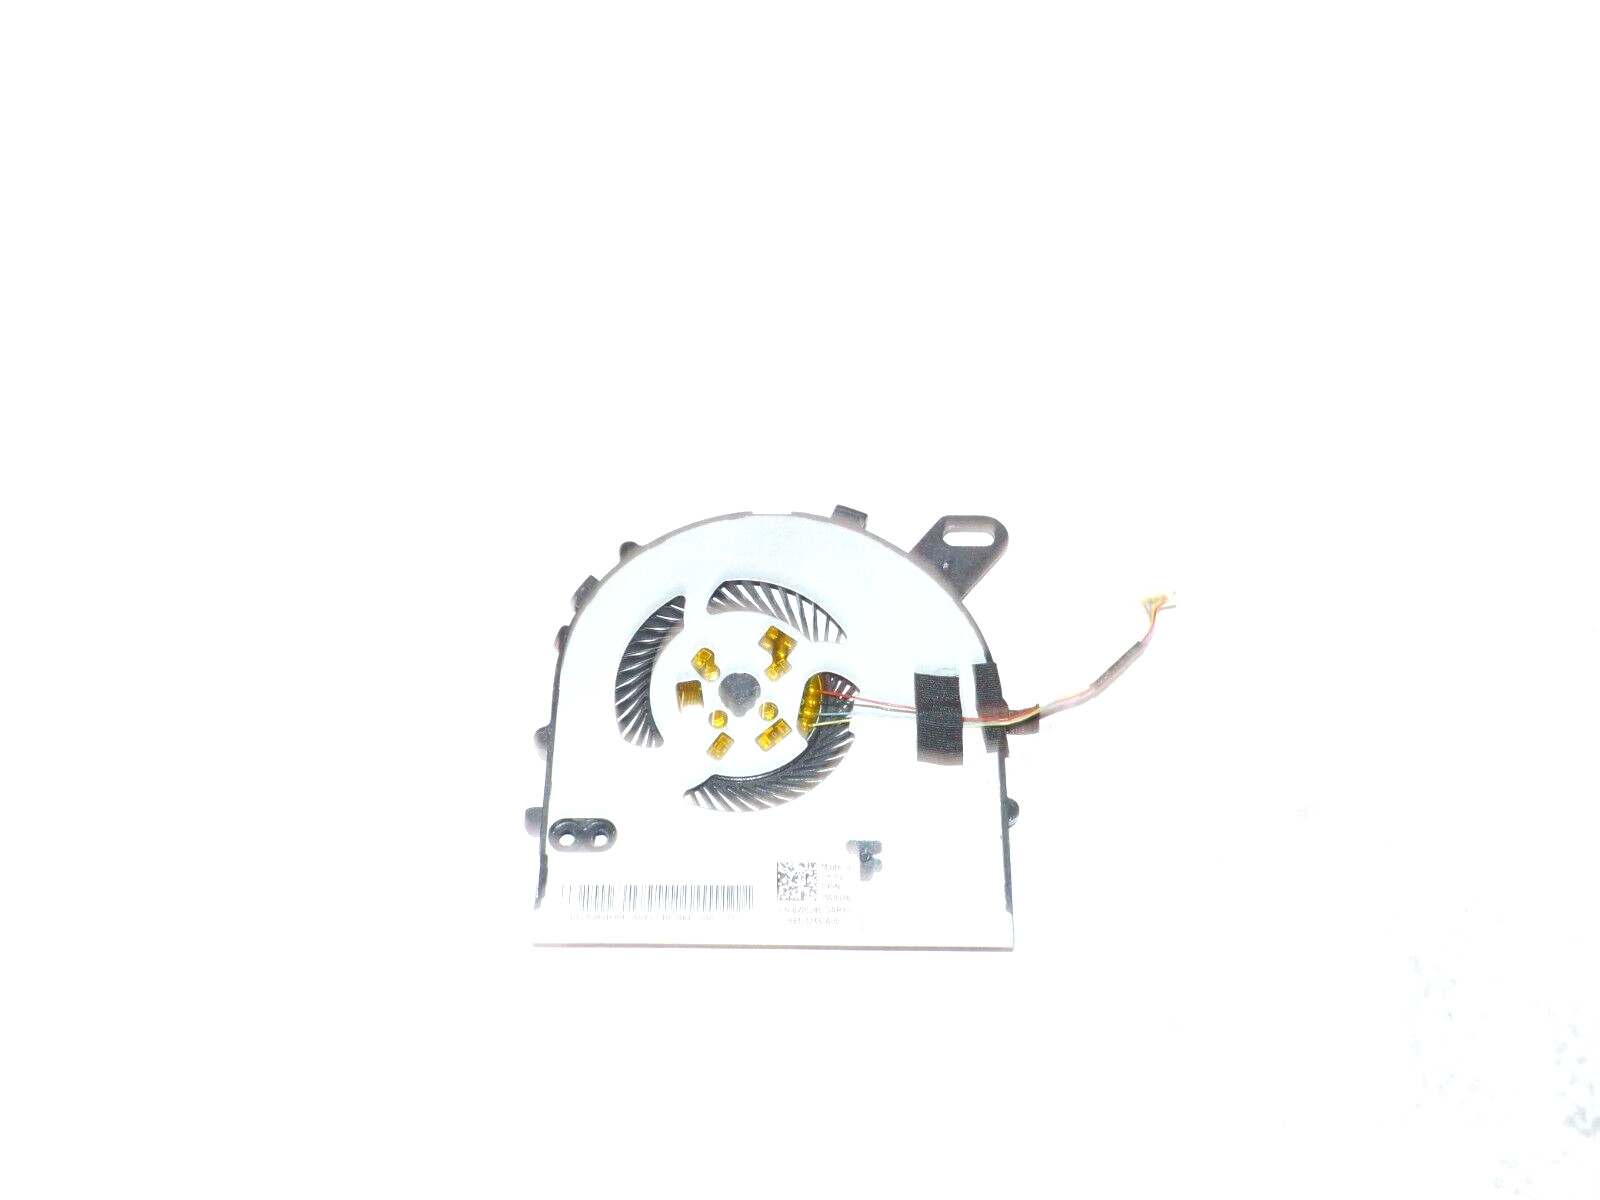 Dell OEM Inspiron 15 7572 7560 Vostro 5468 5568 CPU Cooling Fan AMB02 W0J85